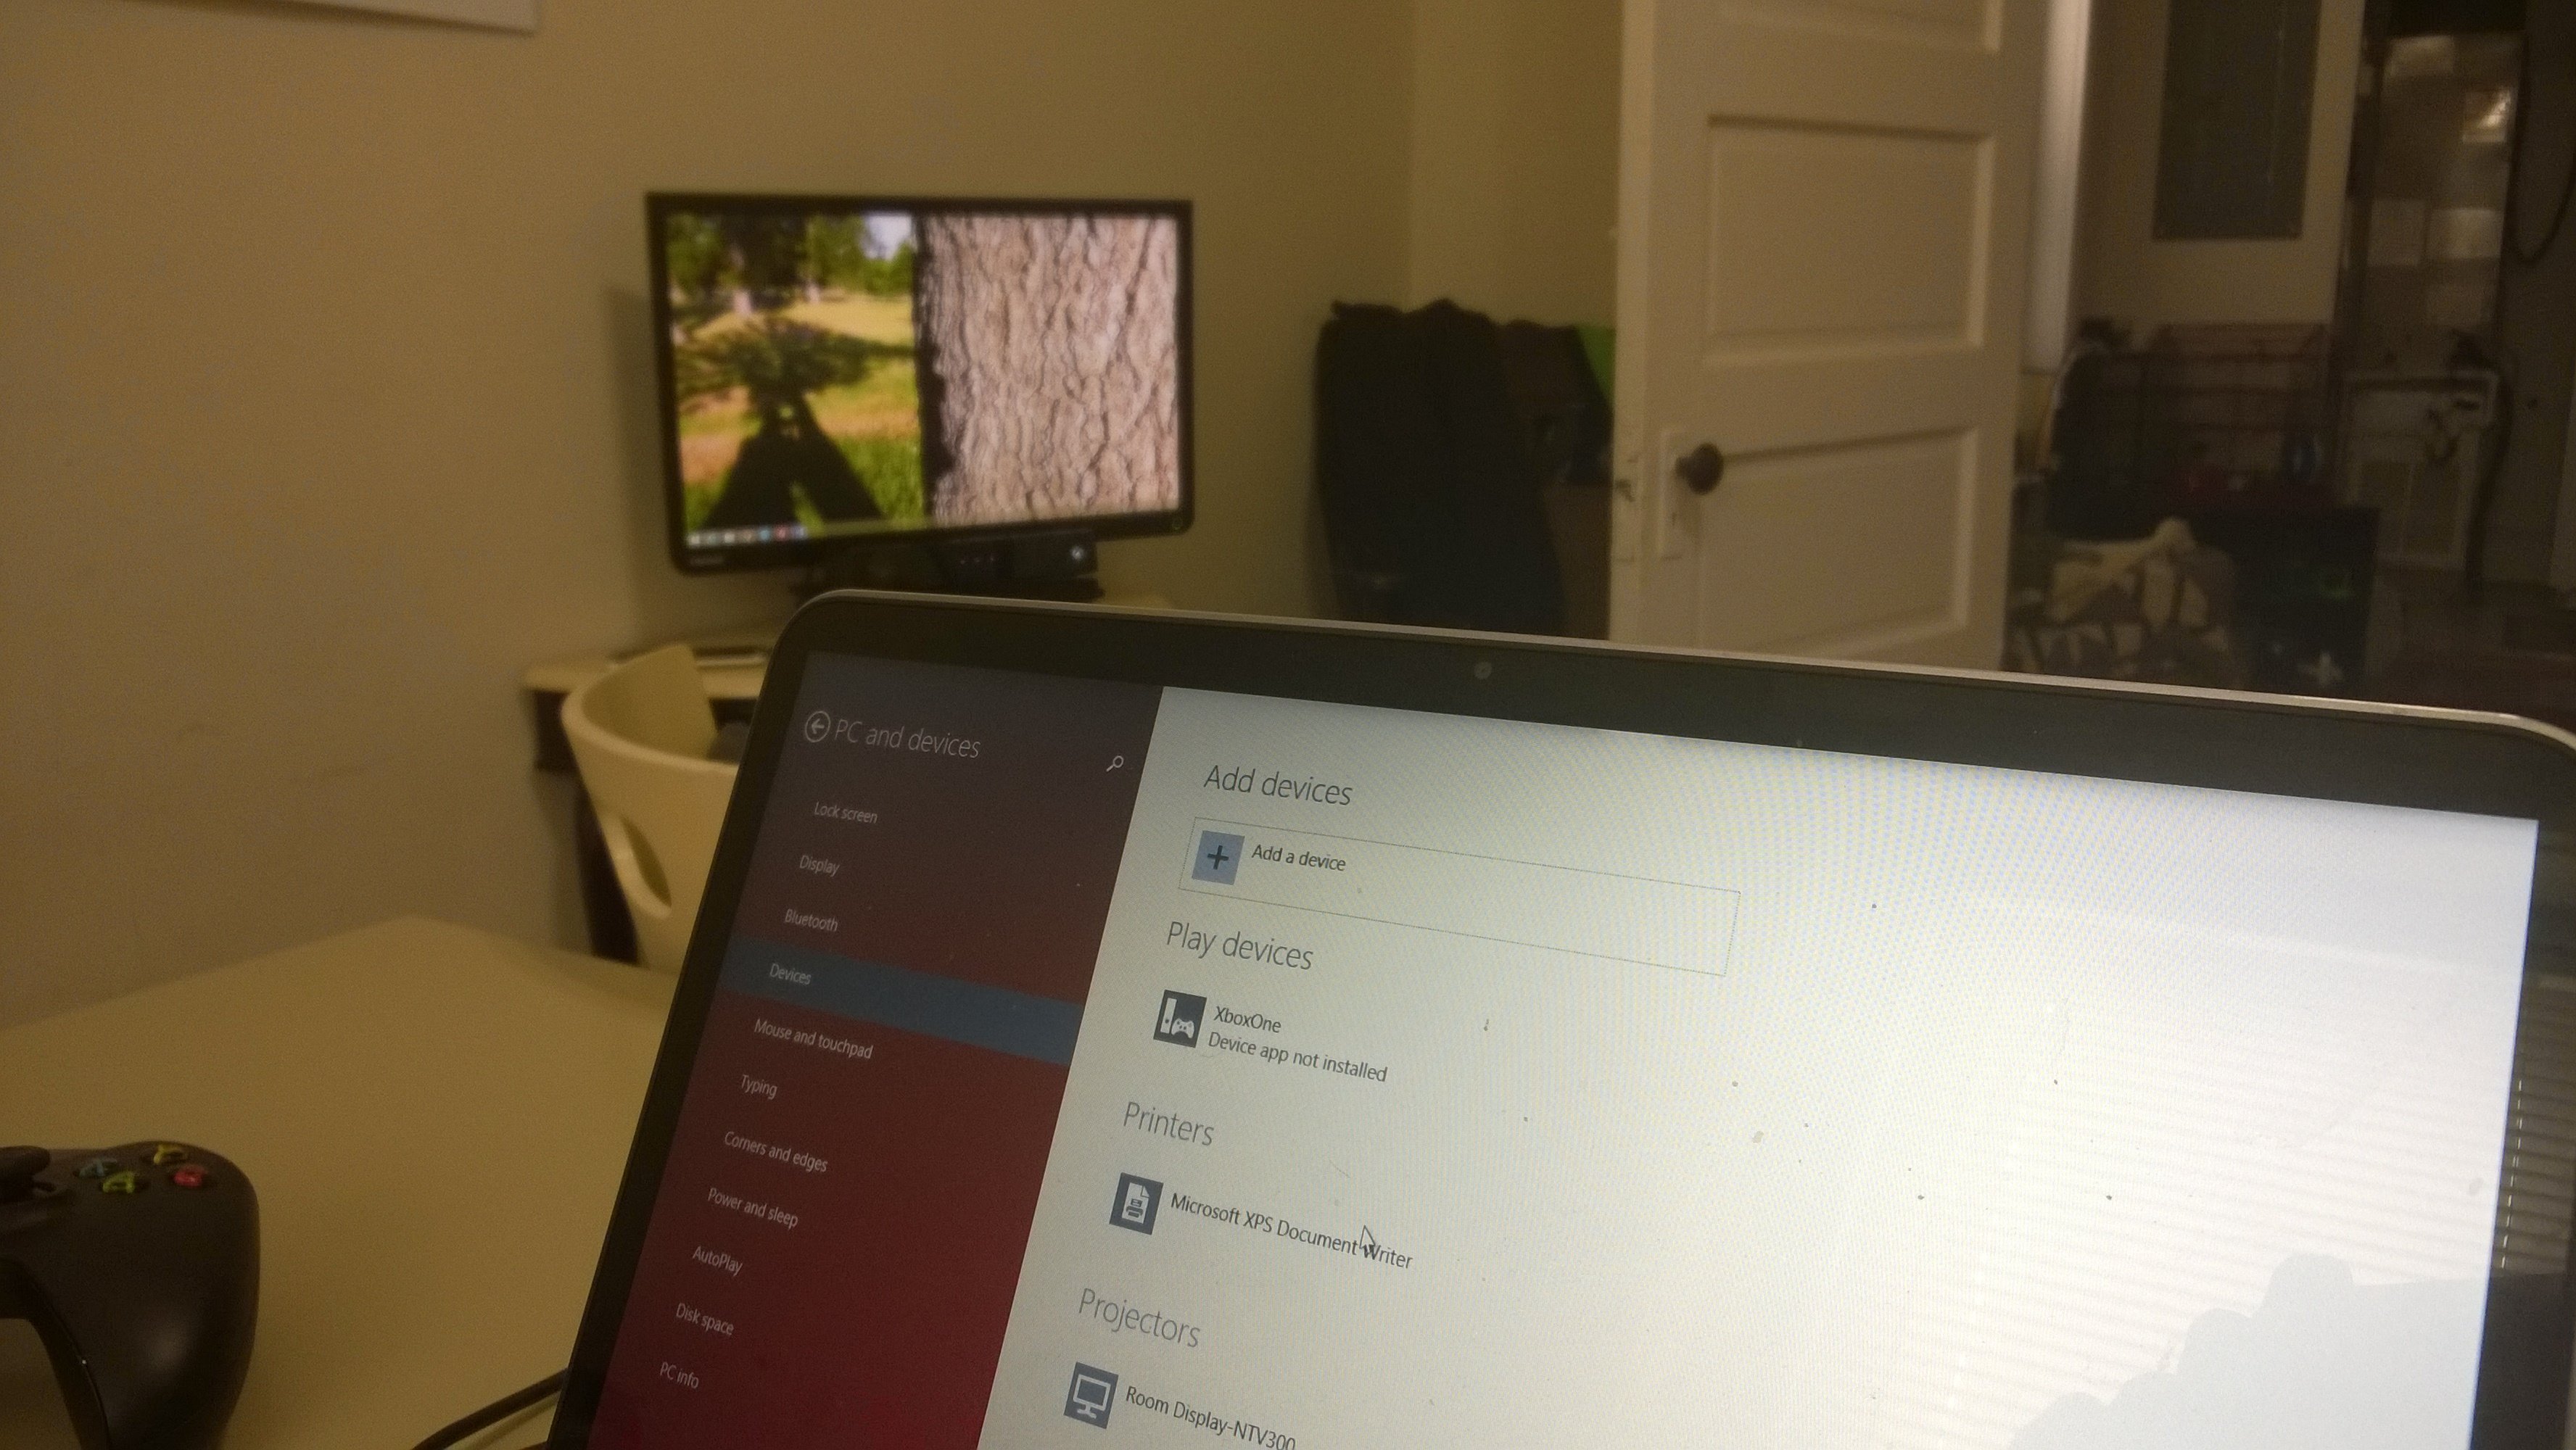 How To Stream Or Mirror Windows 8 A Tv, How To Screen Mirror Iphone Laptop Windows 8 1